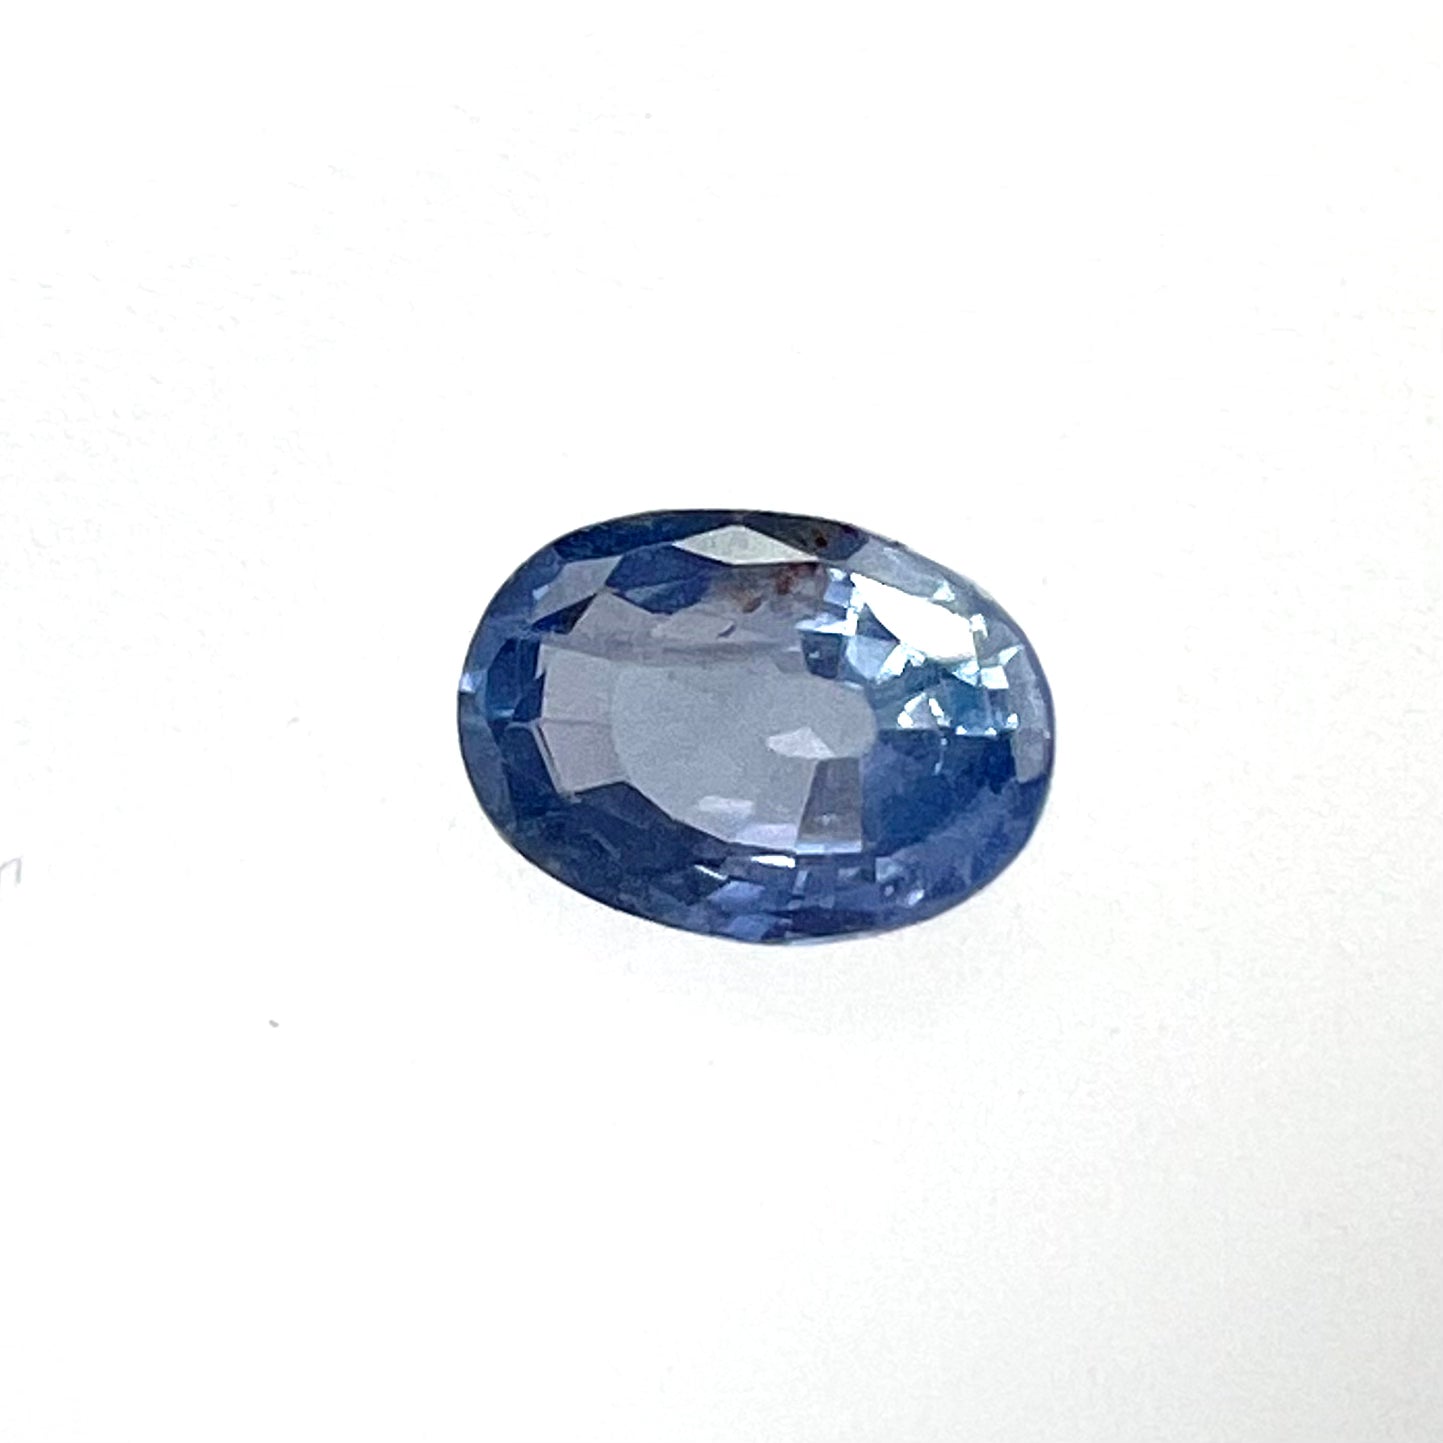 1.3CTW Loose Oval Sapphire 7.28x5.2x3.98mmEarth mined Gemstone